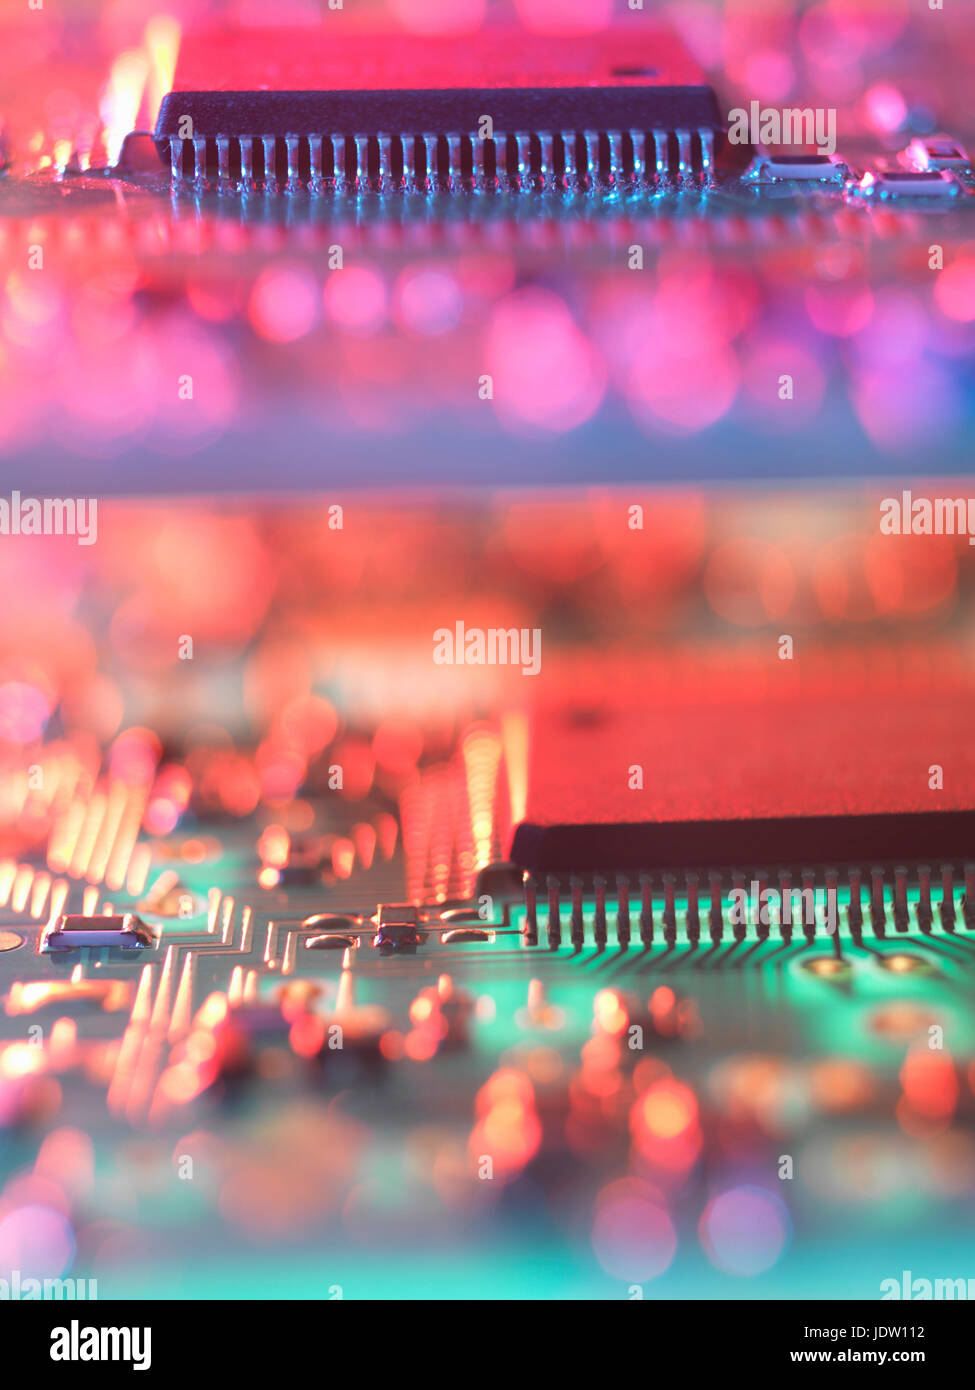 Close up of colorful circuit board Stock Photo